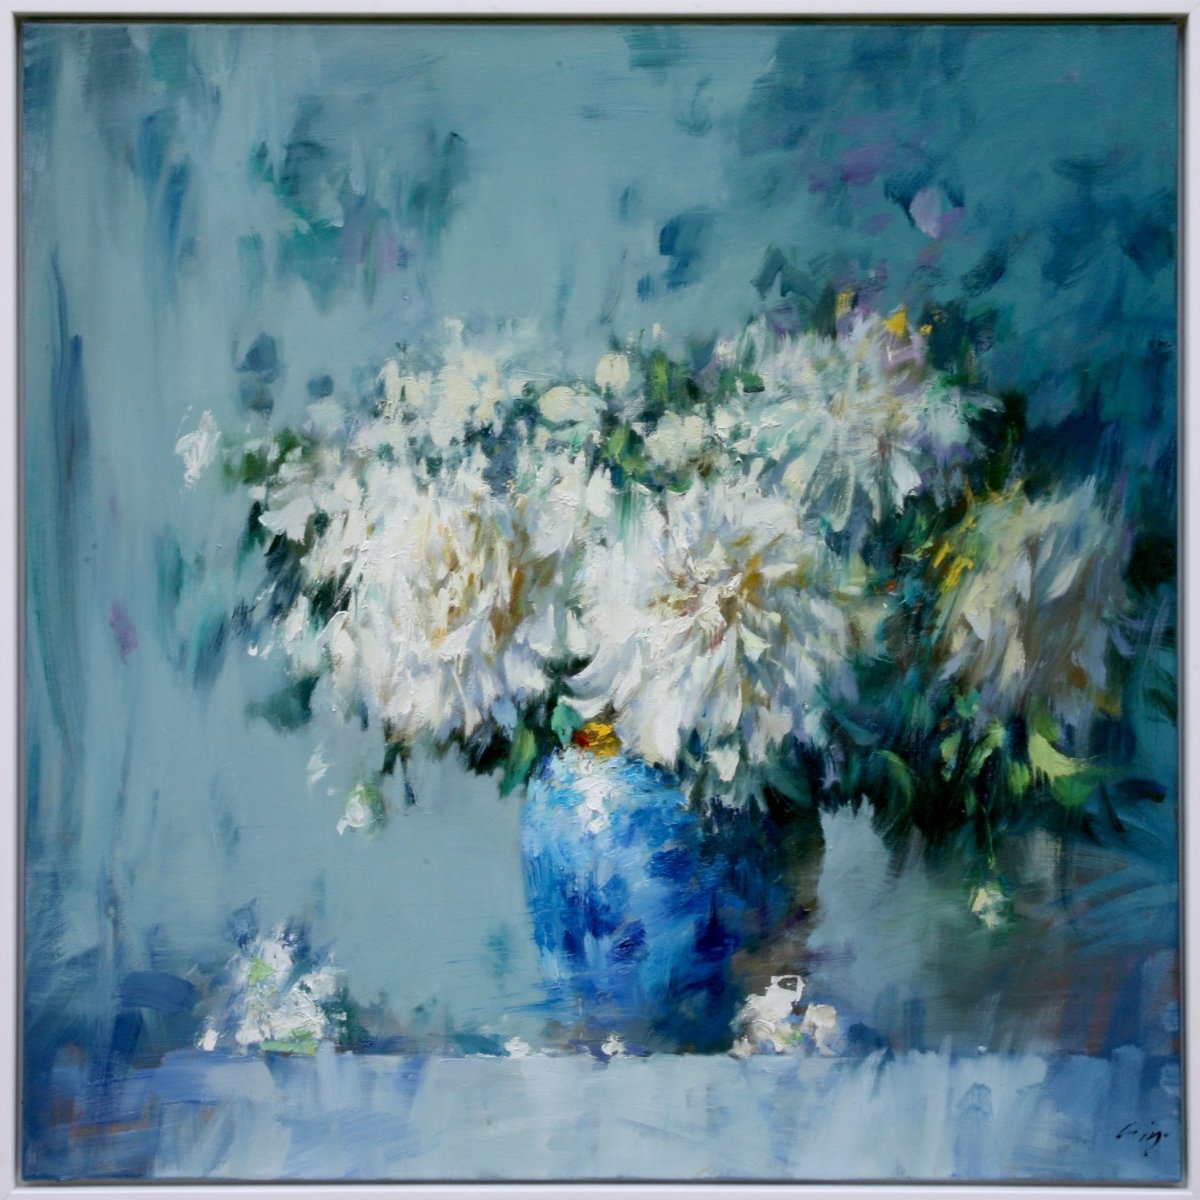 White Peonies by Ning Lee at LePrince Galleries